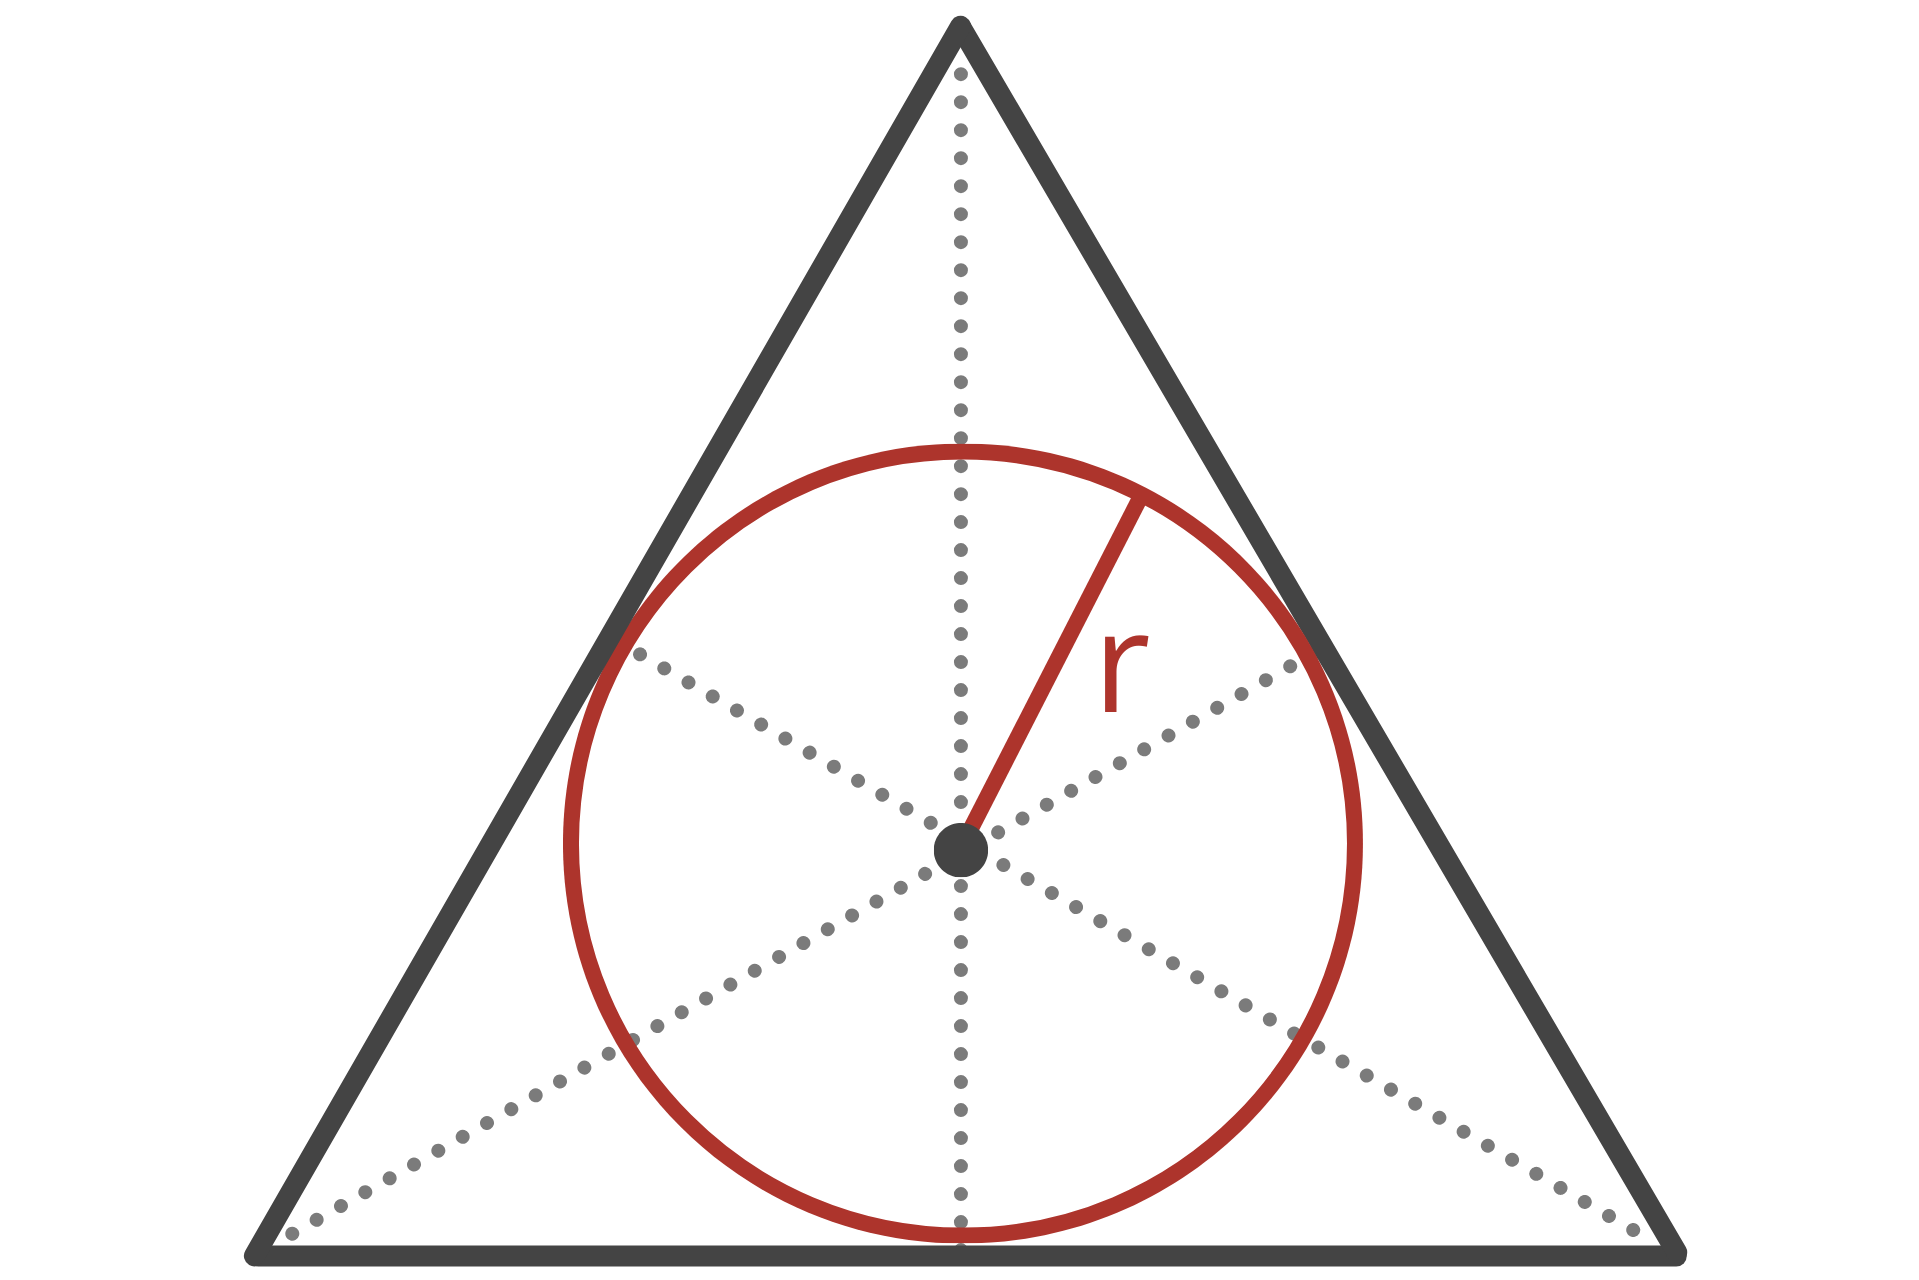 Graphic showing the inscribed circle and inradius for an equilateral triangle